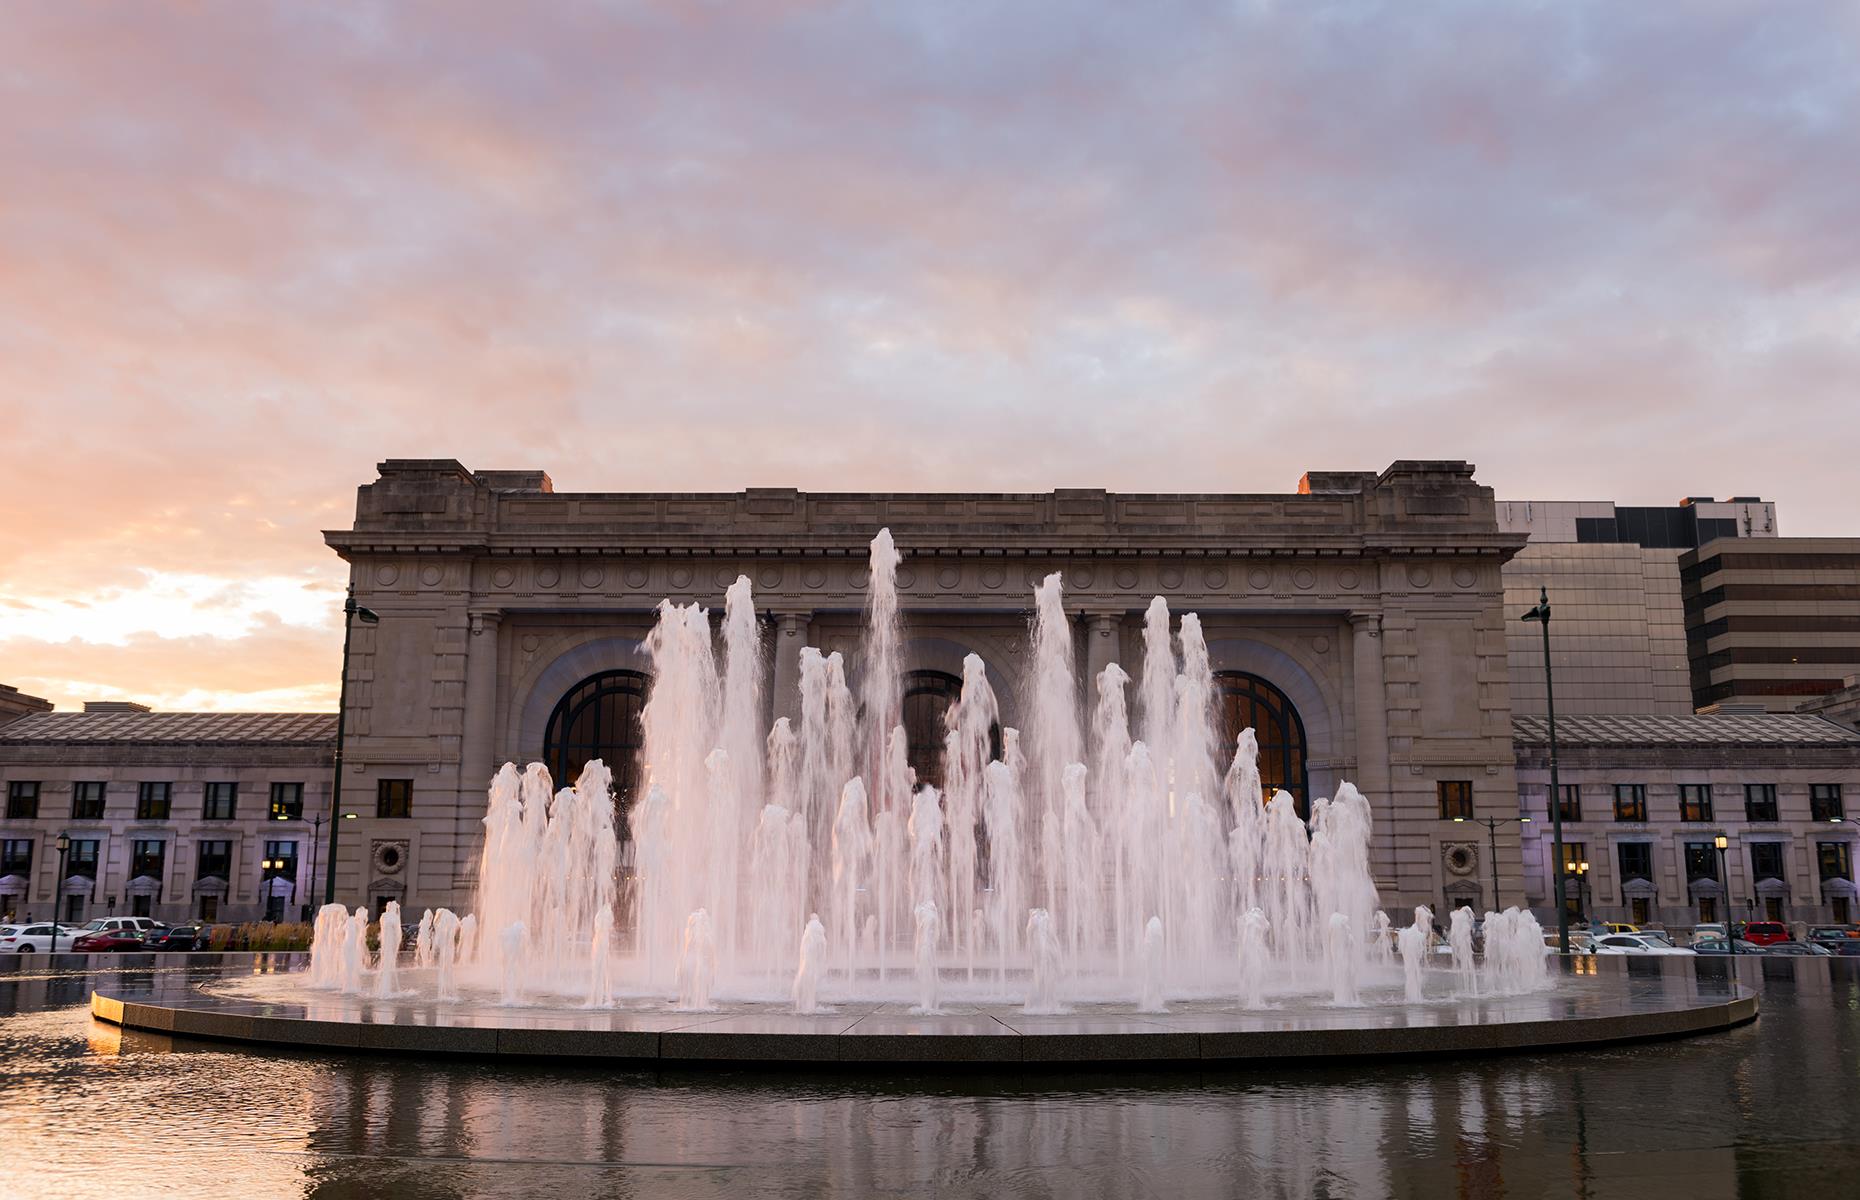 <p>Did you know that Kansas City is also known as The City of Fountains? With more than 200 fountains, the city definitely isn't short on watery landmarks. This <a href="https://earth.google.com/web/@39.0668847,-94.5732779,301.20842741a,64074.2946844d,35y,0h,9.22313064t,0r/data=CjASLhIgYjEwNzY2NTkyMGViMTFlOThiYTBiOTE4OTJiY2Y0MDQiCnZveV9zcGxhc2g">virtual tour</a> features seven of those, including the grand Henry Wollman Bloch Fountain, designed by the same people who created the iconic Bellagio fountains in Las Vegas, and the playful Children's Fountain. Discover <a href="https://www.loveexploring.com/gallerylist/82982/the-worlds-most-spectacular-water-displays">the world's most spectacular water displays</a>.</p>